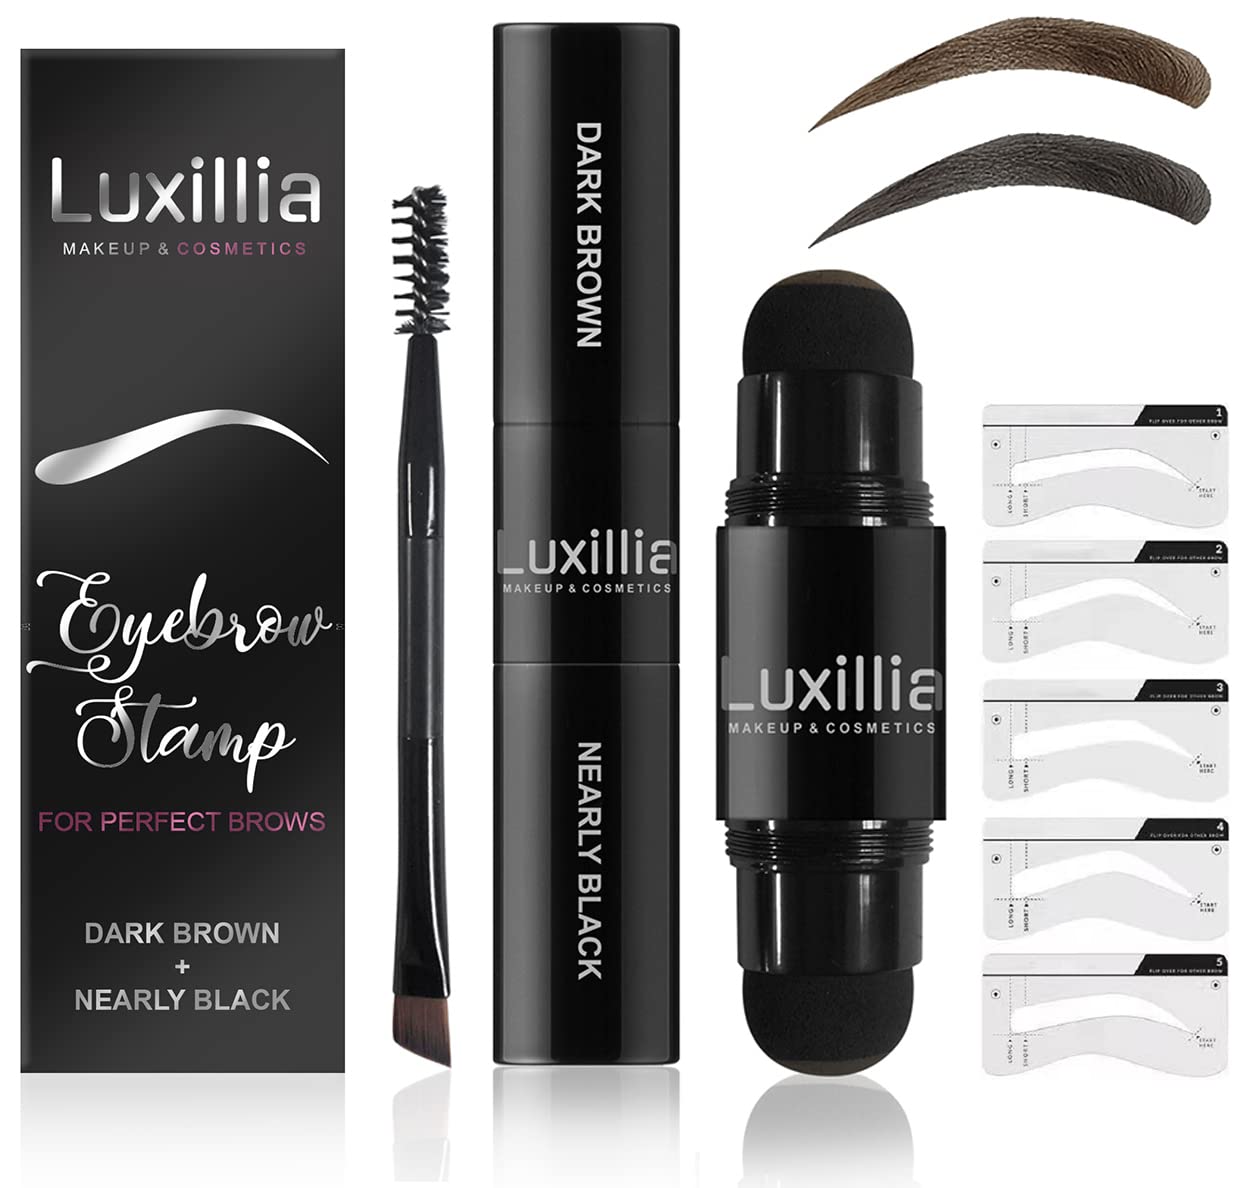 Luxillia Eyebrow Stamp Stencil Kit Dual-Color, Perfect Instant Brows Every Time, Adjustable for all Eyebrow Shapes, Waterproof and Sweatproof, Reusable & Super Easy To Use (DARK BROWN & NEARLY BLACK)